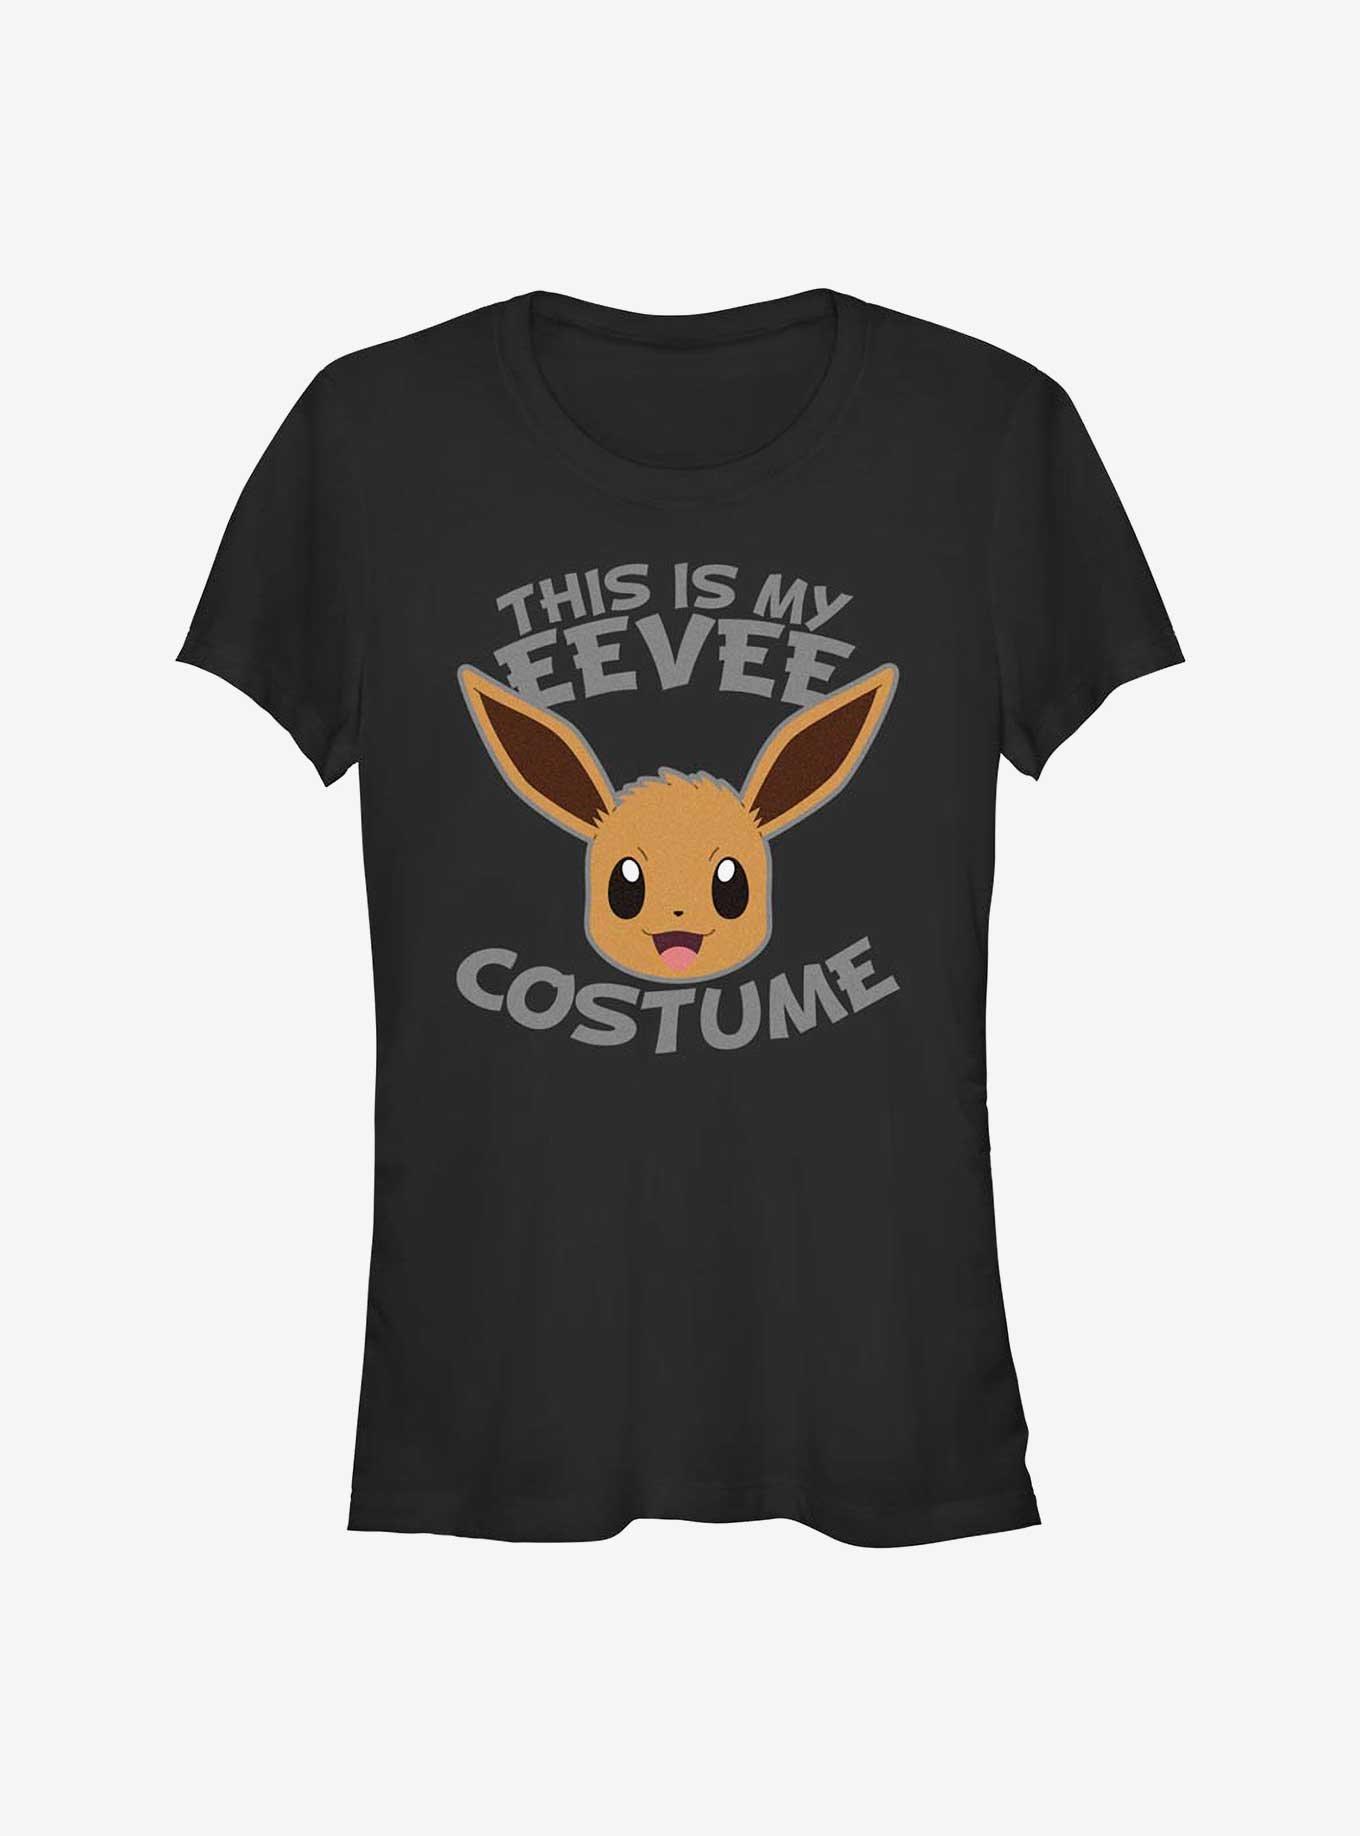  Girl's Pokemon Halloween This is My Eevee Costume T-Shirt -  Black - Small : Clothing, Shoes & Jewelry